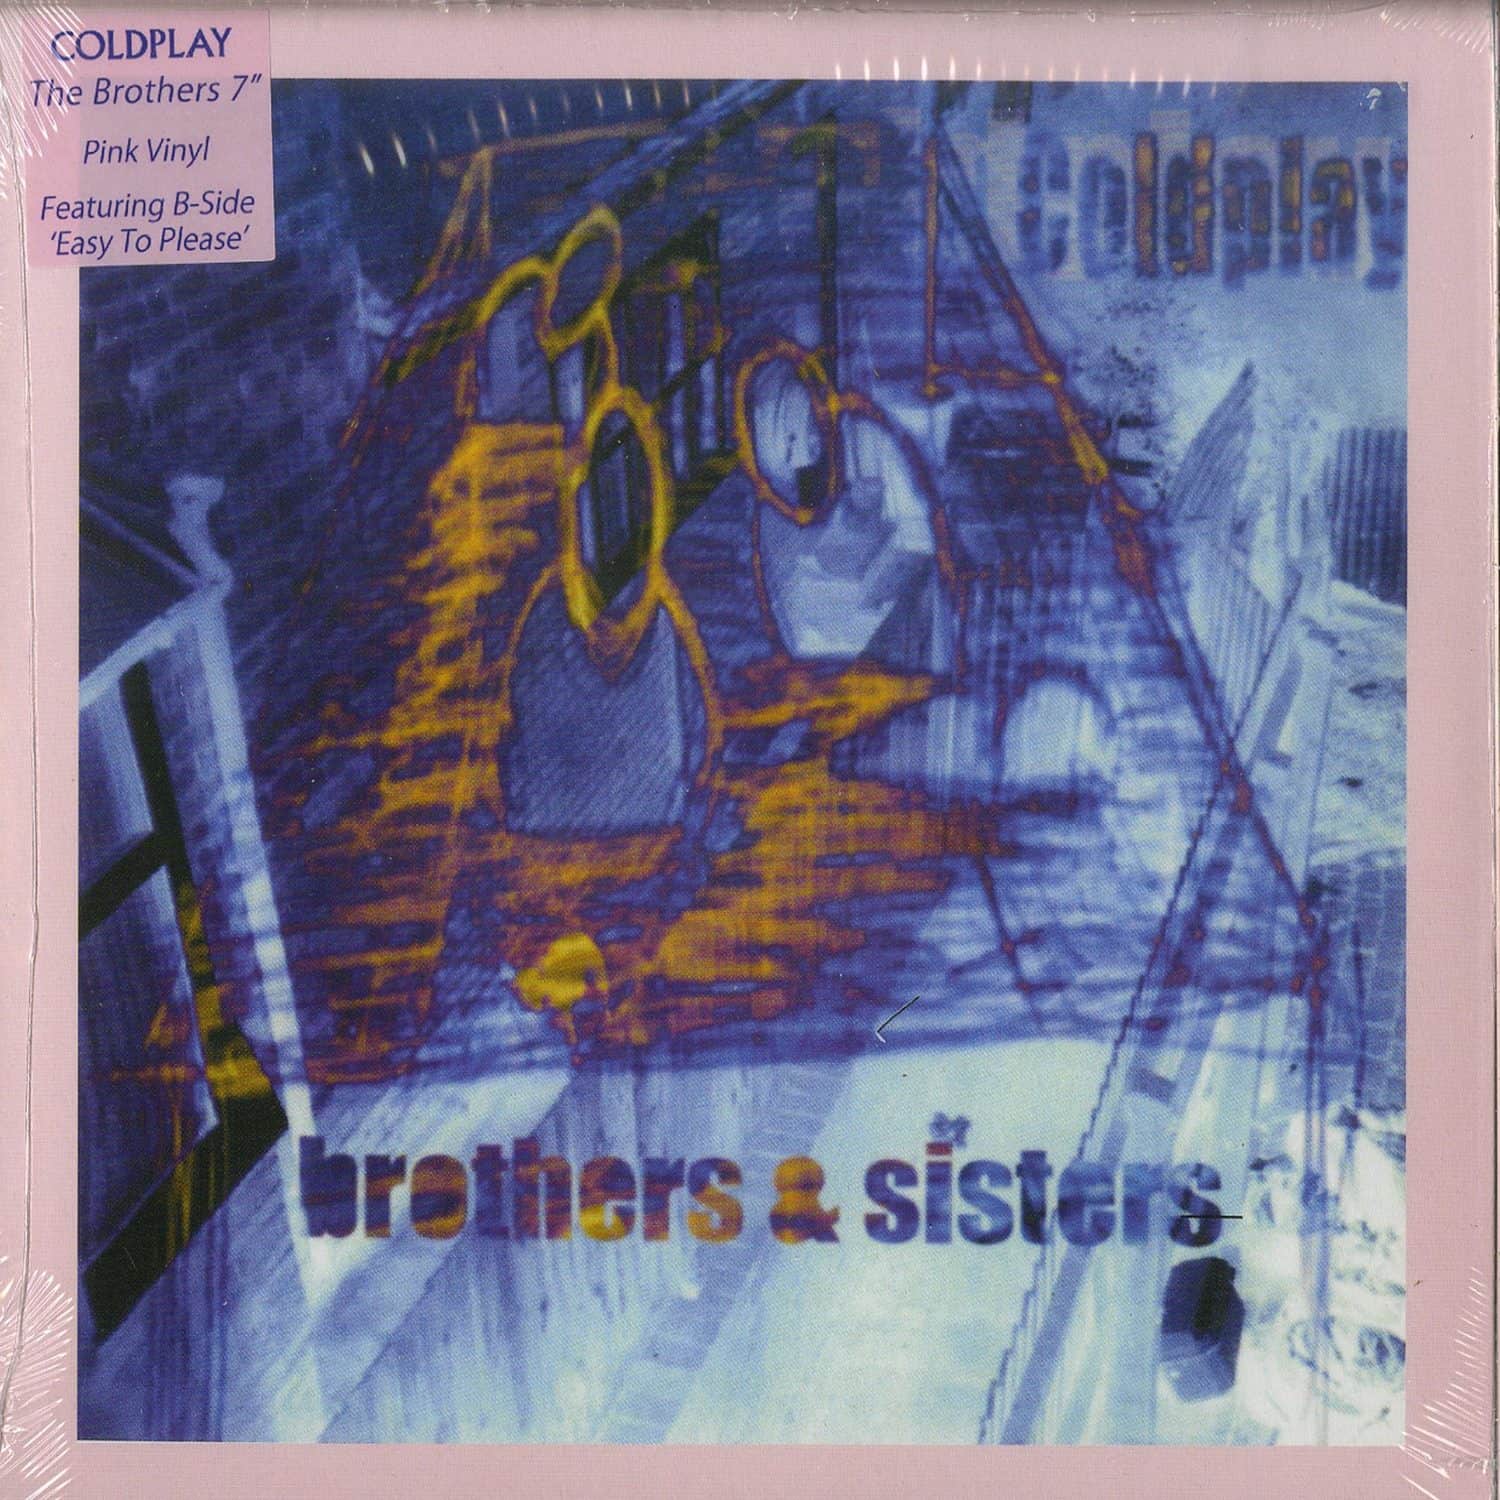 Coldplay - BROTHERS & SISTERS 